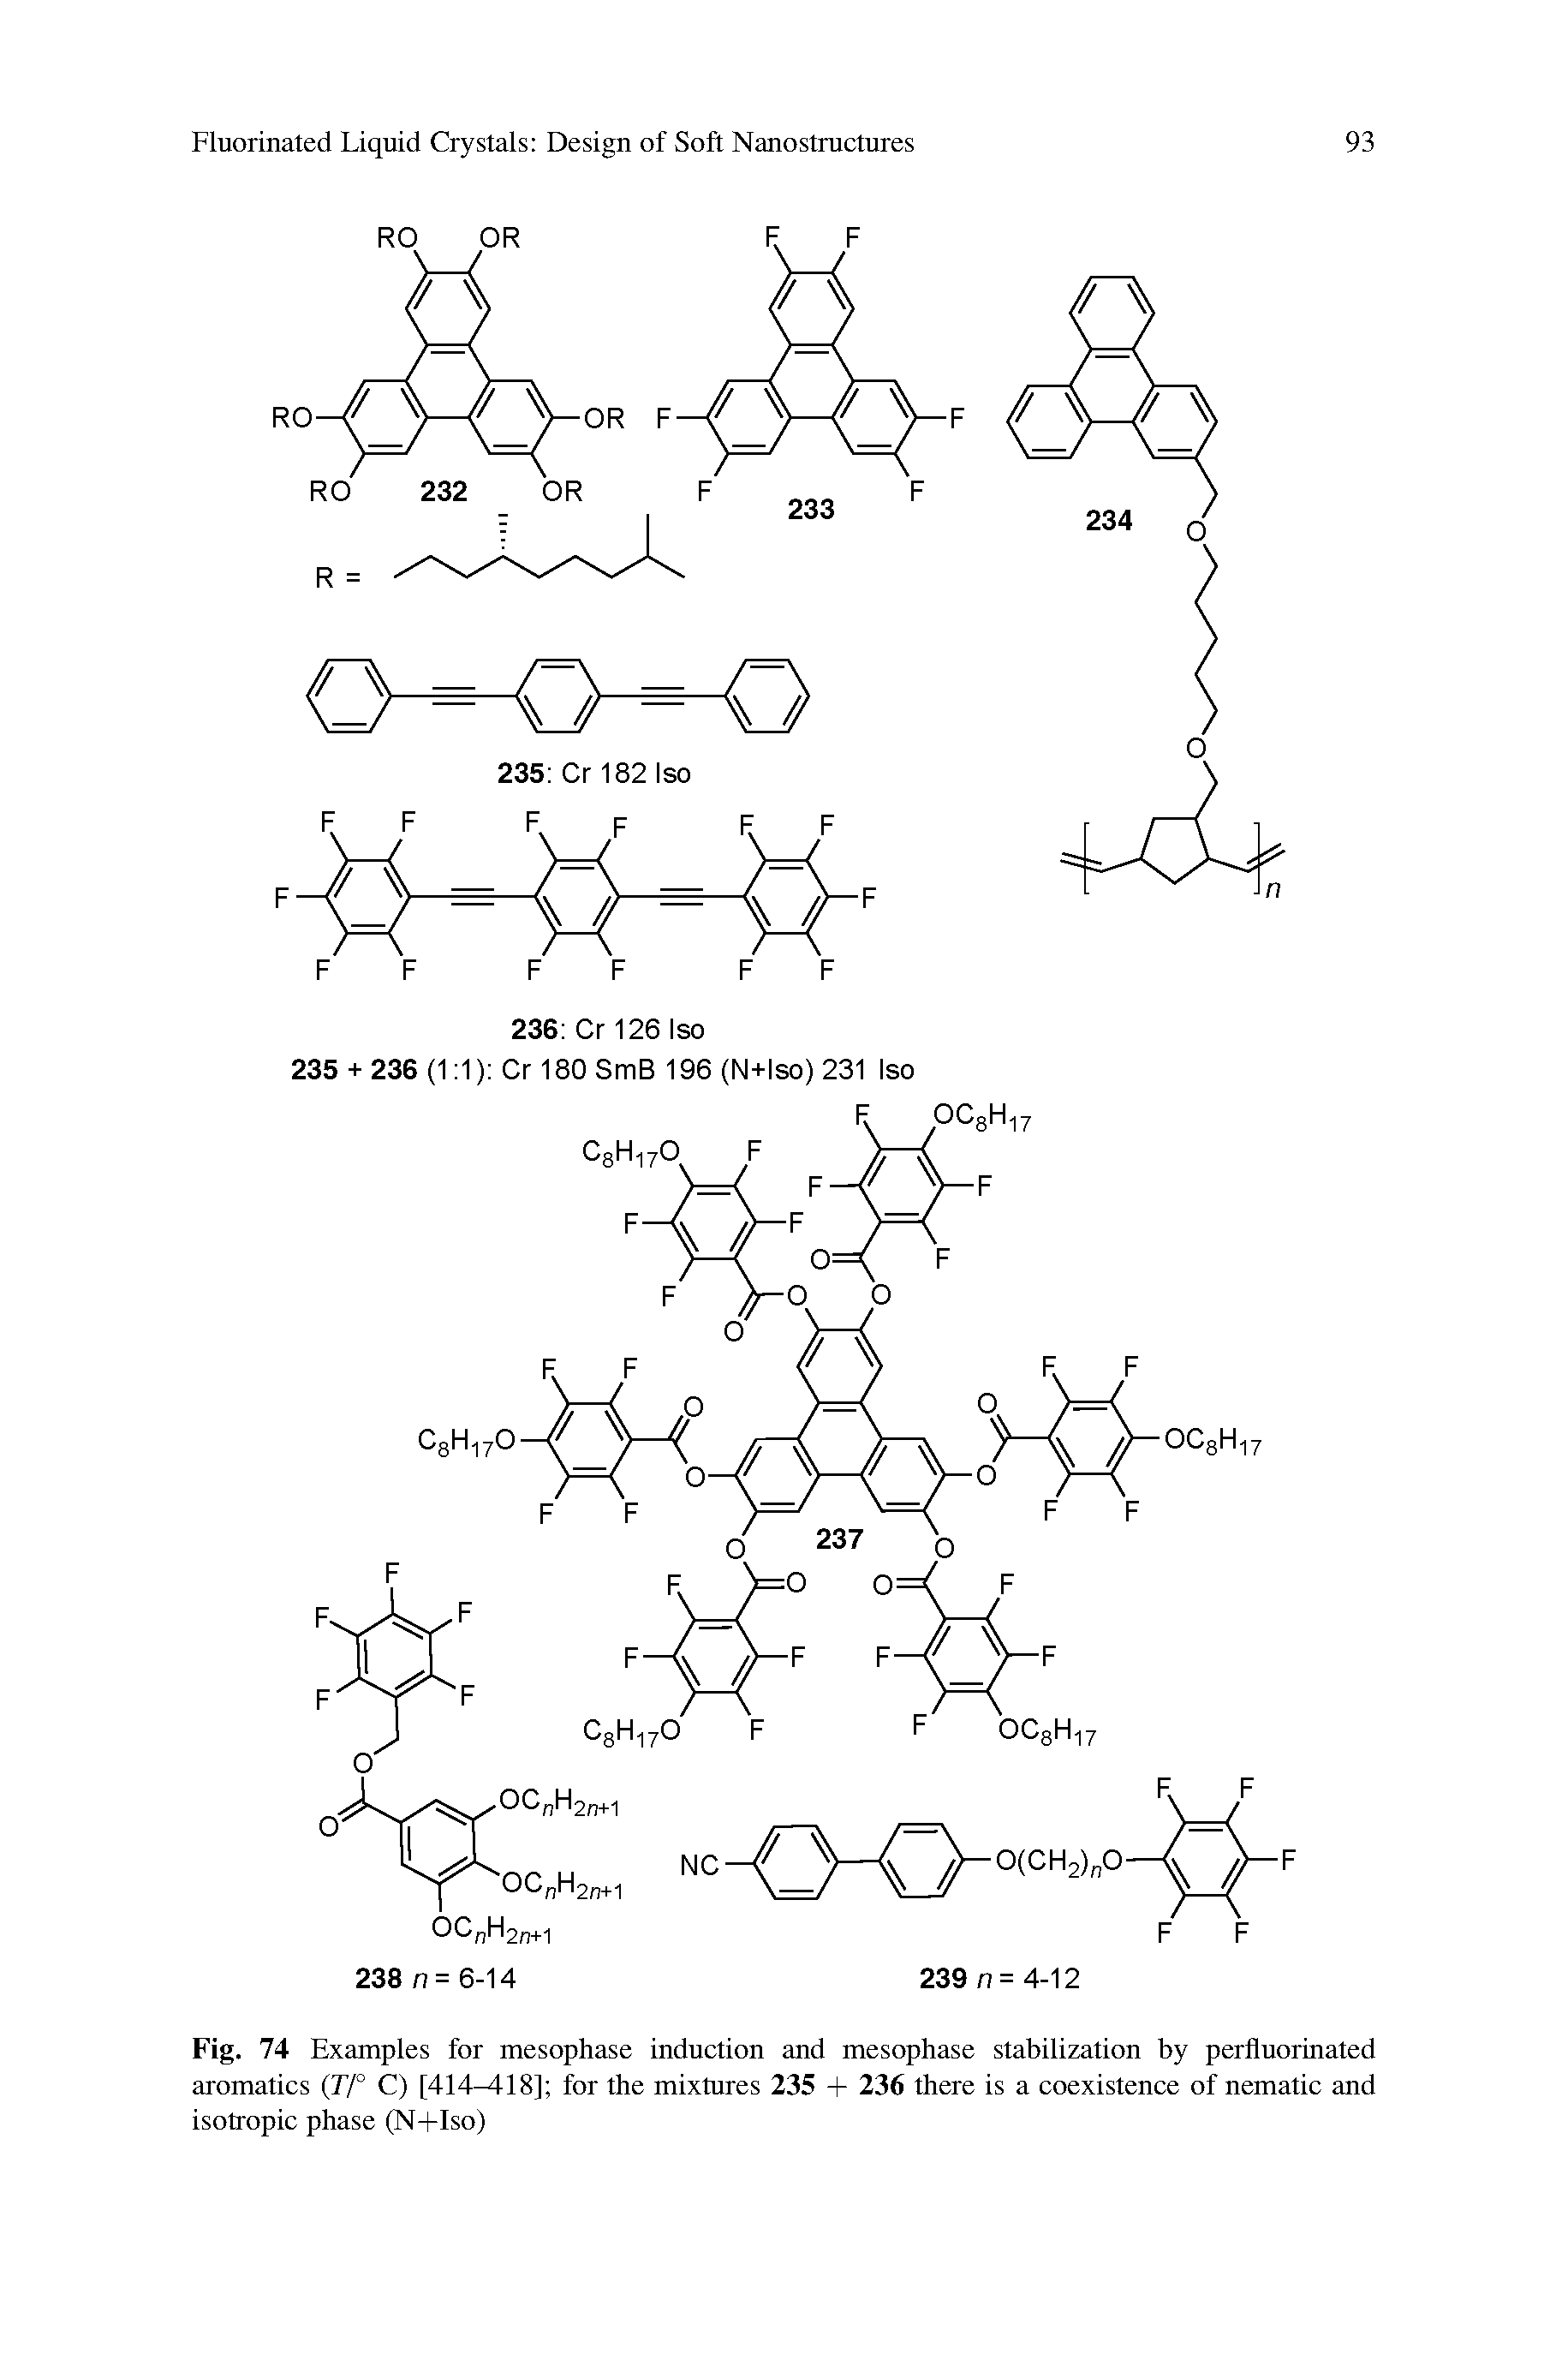 Fig. 74 Examples for mesophase induction and mesophase stabilization by perfluorinated aromatics (77° C) [414 -18] for the mixtures 235 + 236 there is a coexistence of nematic and isotropic phase (N+Iso)...